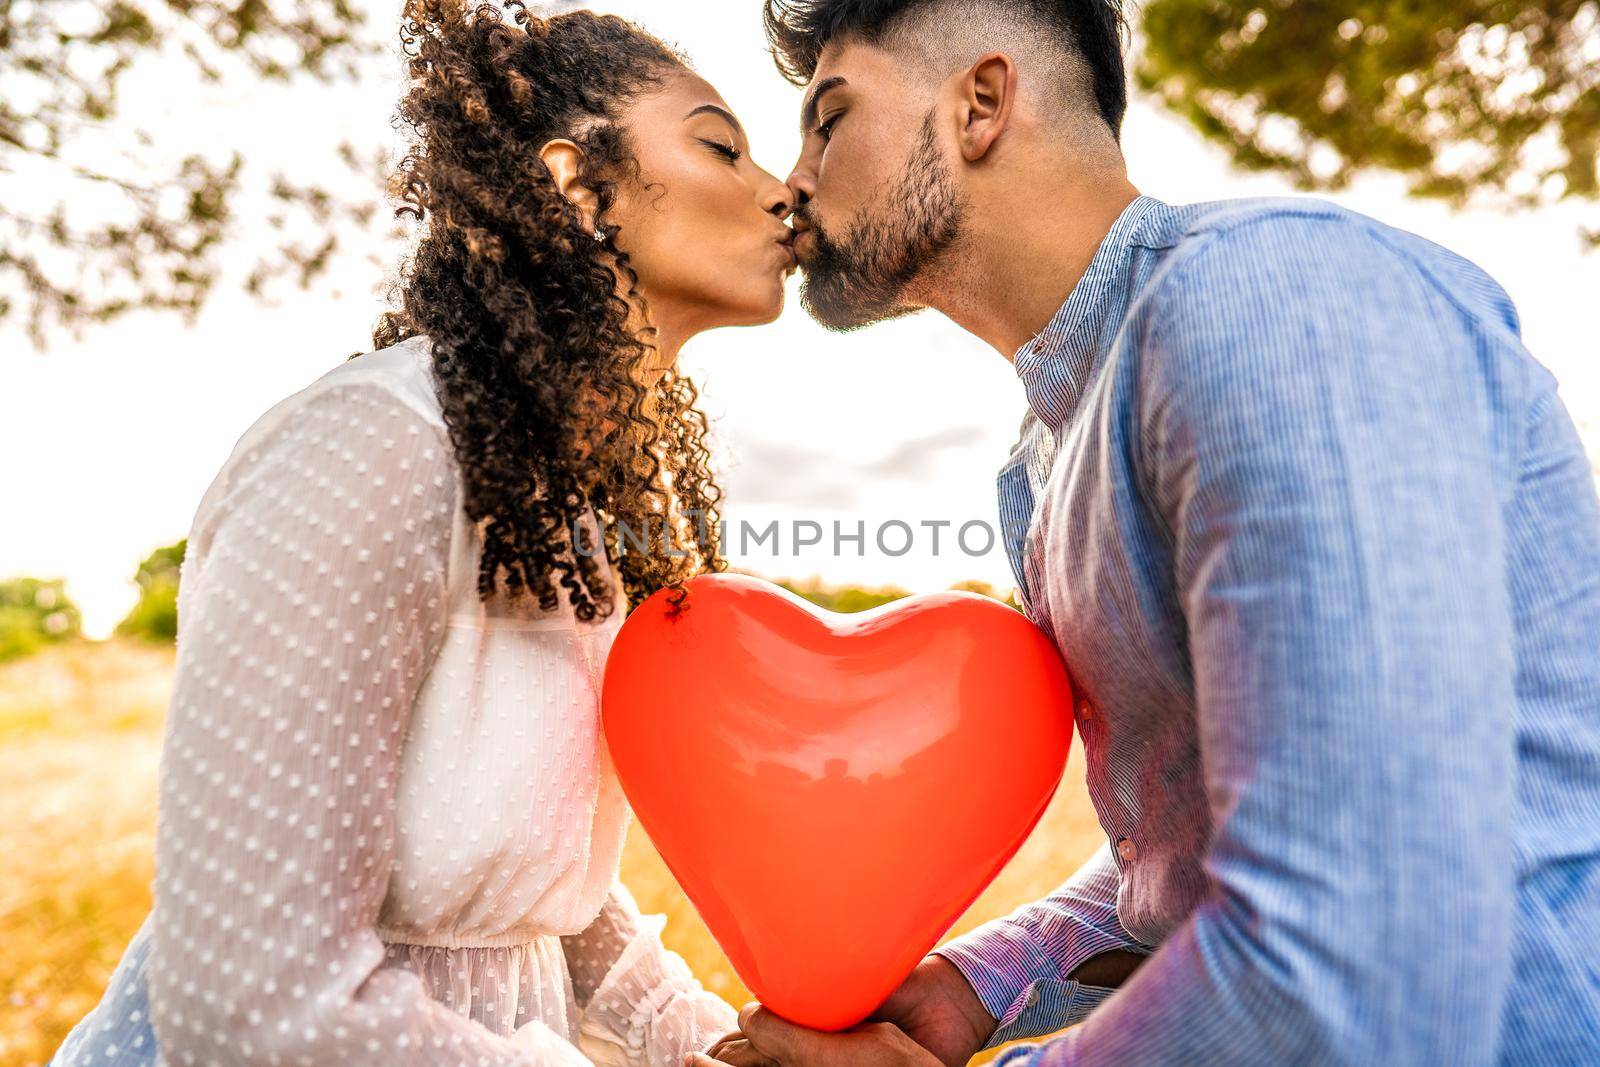 Profile photograph of multiracial couple in love kissing at sunset in nature with sun backlit effect on red heart shaped balloon among them. Romantic scene at dusk of two heterosexual young people